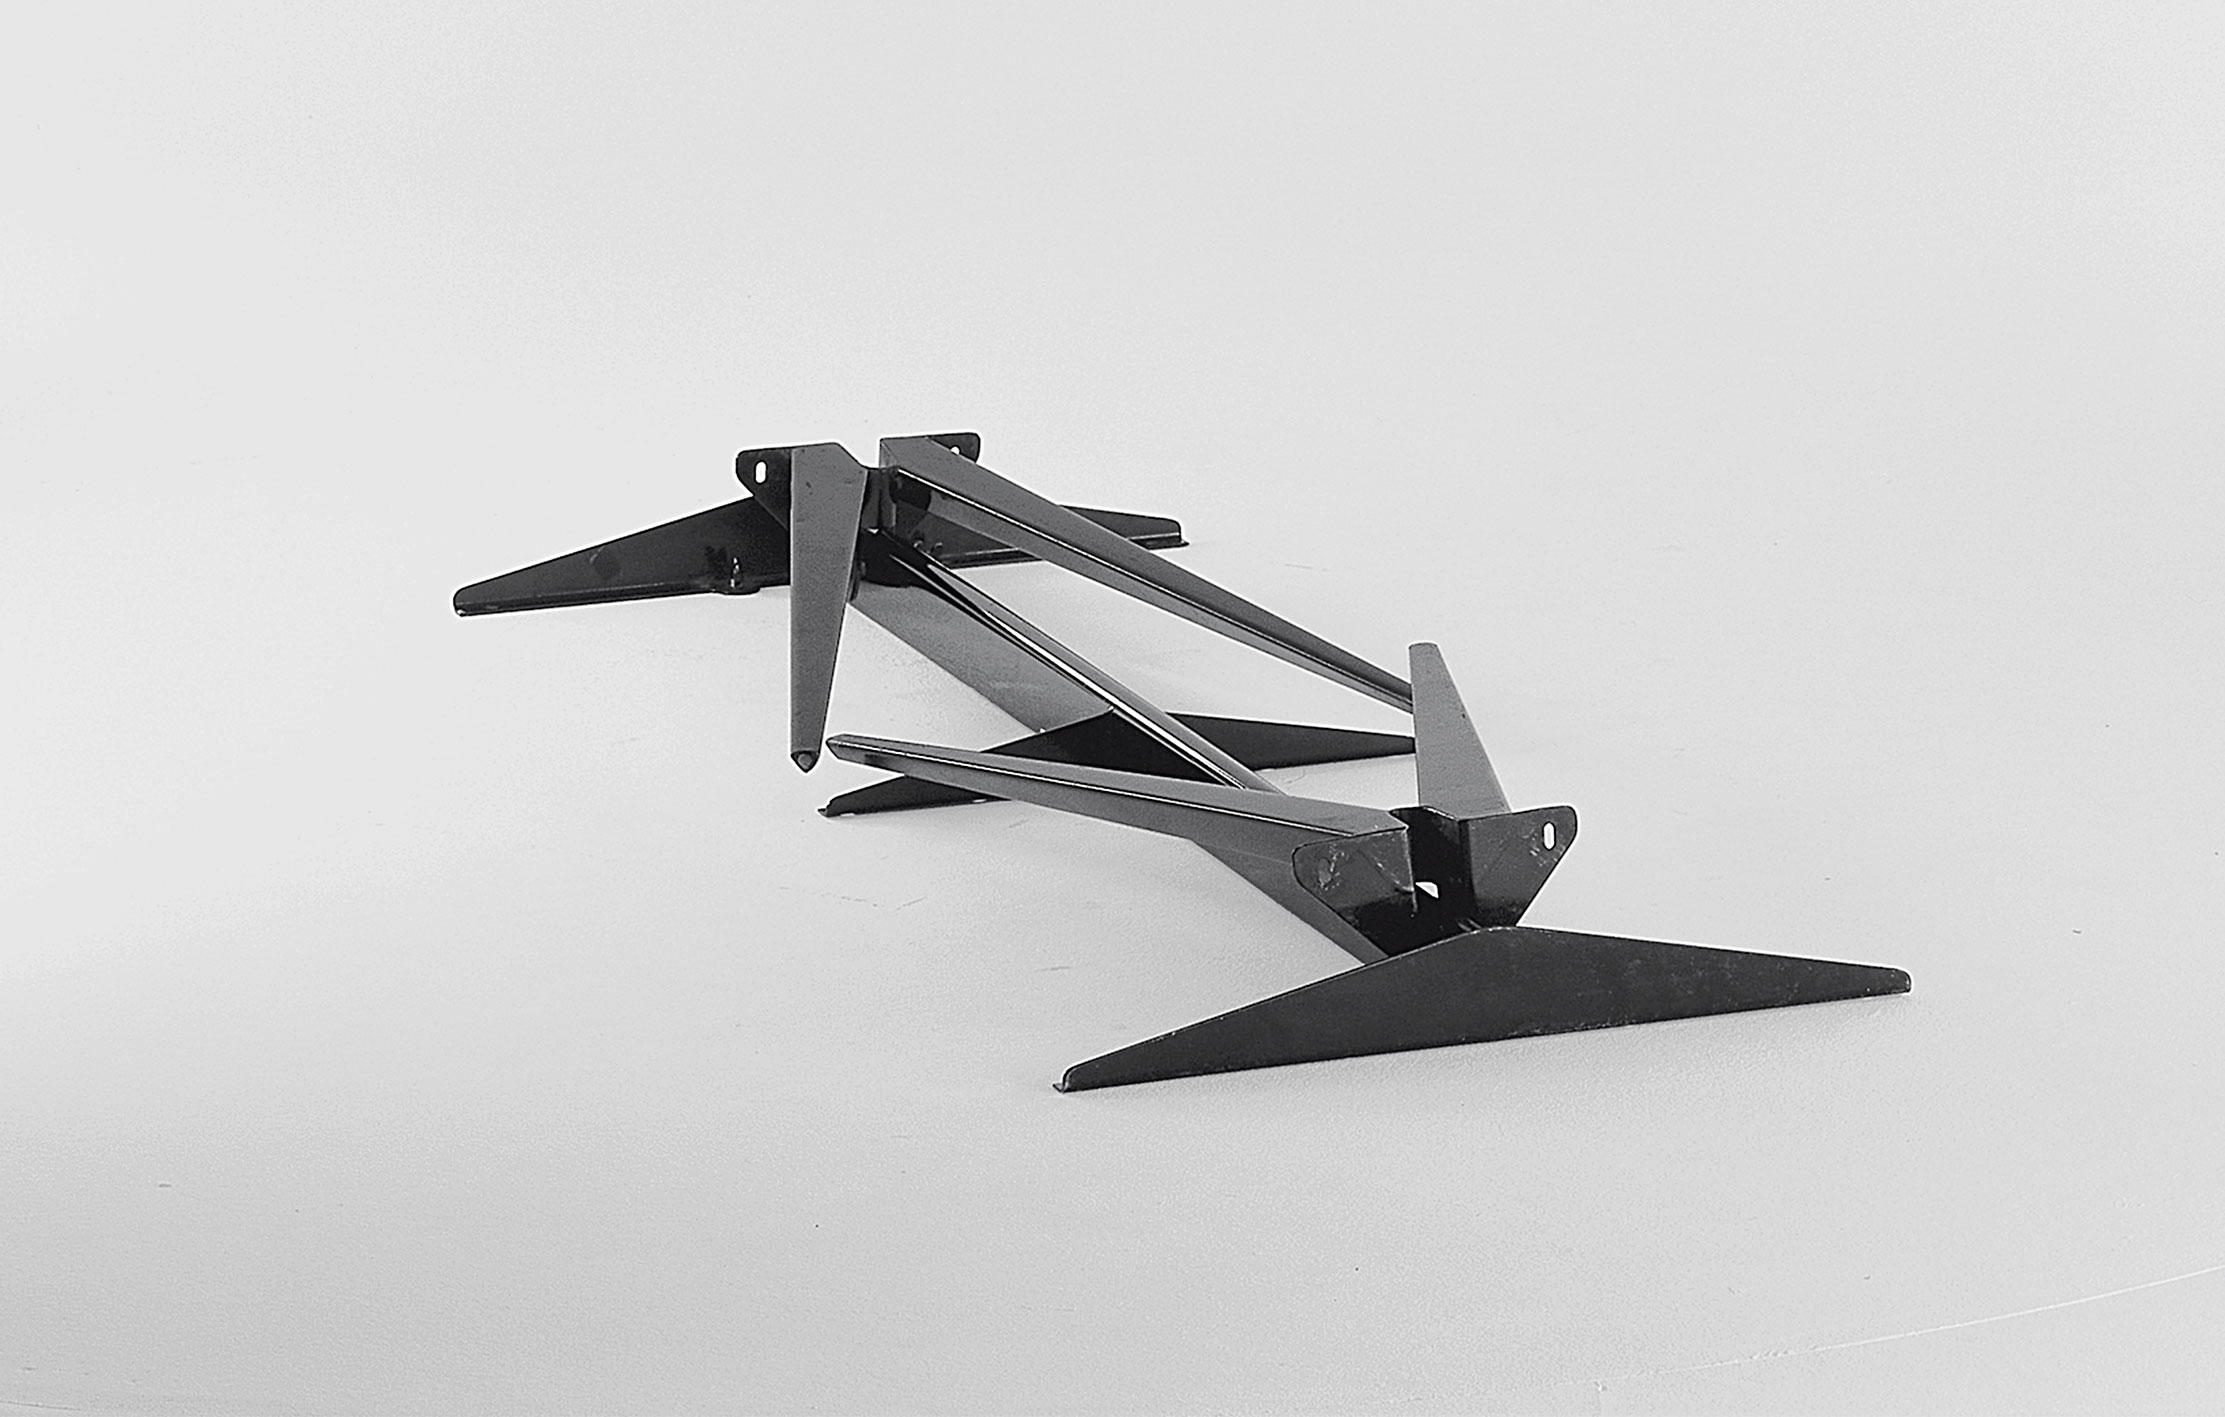 Folding table with Compas legs. Prototype, ca. 1955.